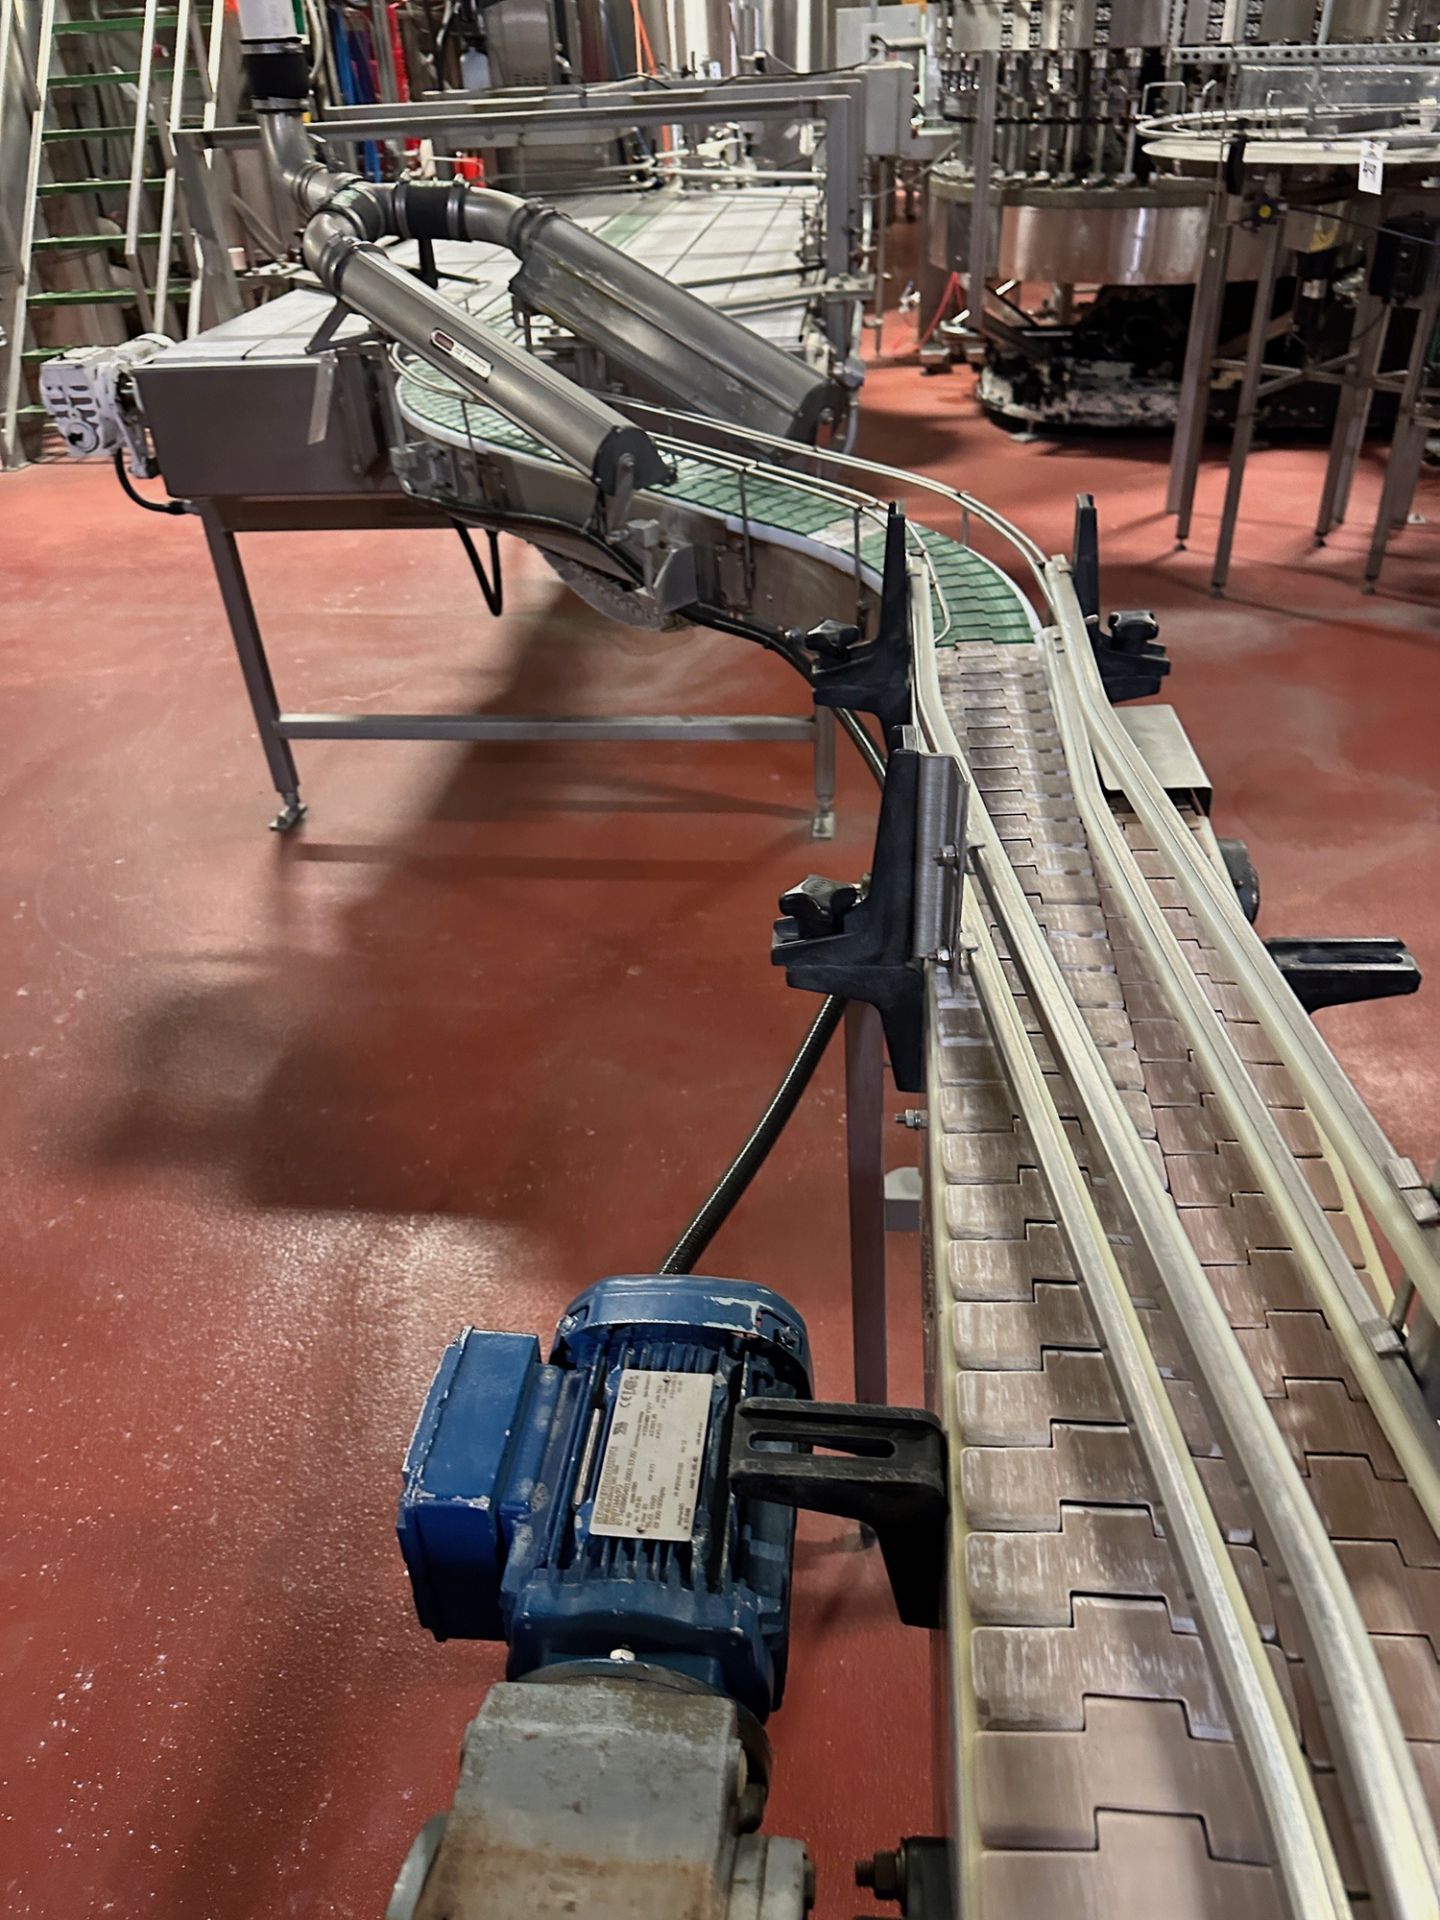 Bevco 4.5" Intralox Belt over Stainless Steel Conveyor from Air Knives to Pack Lead | Rig Fee $200 - Image 3 of 3